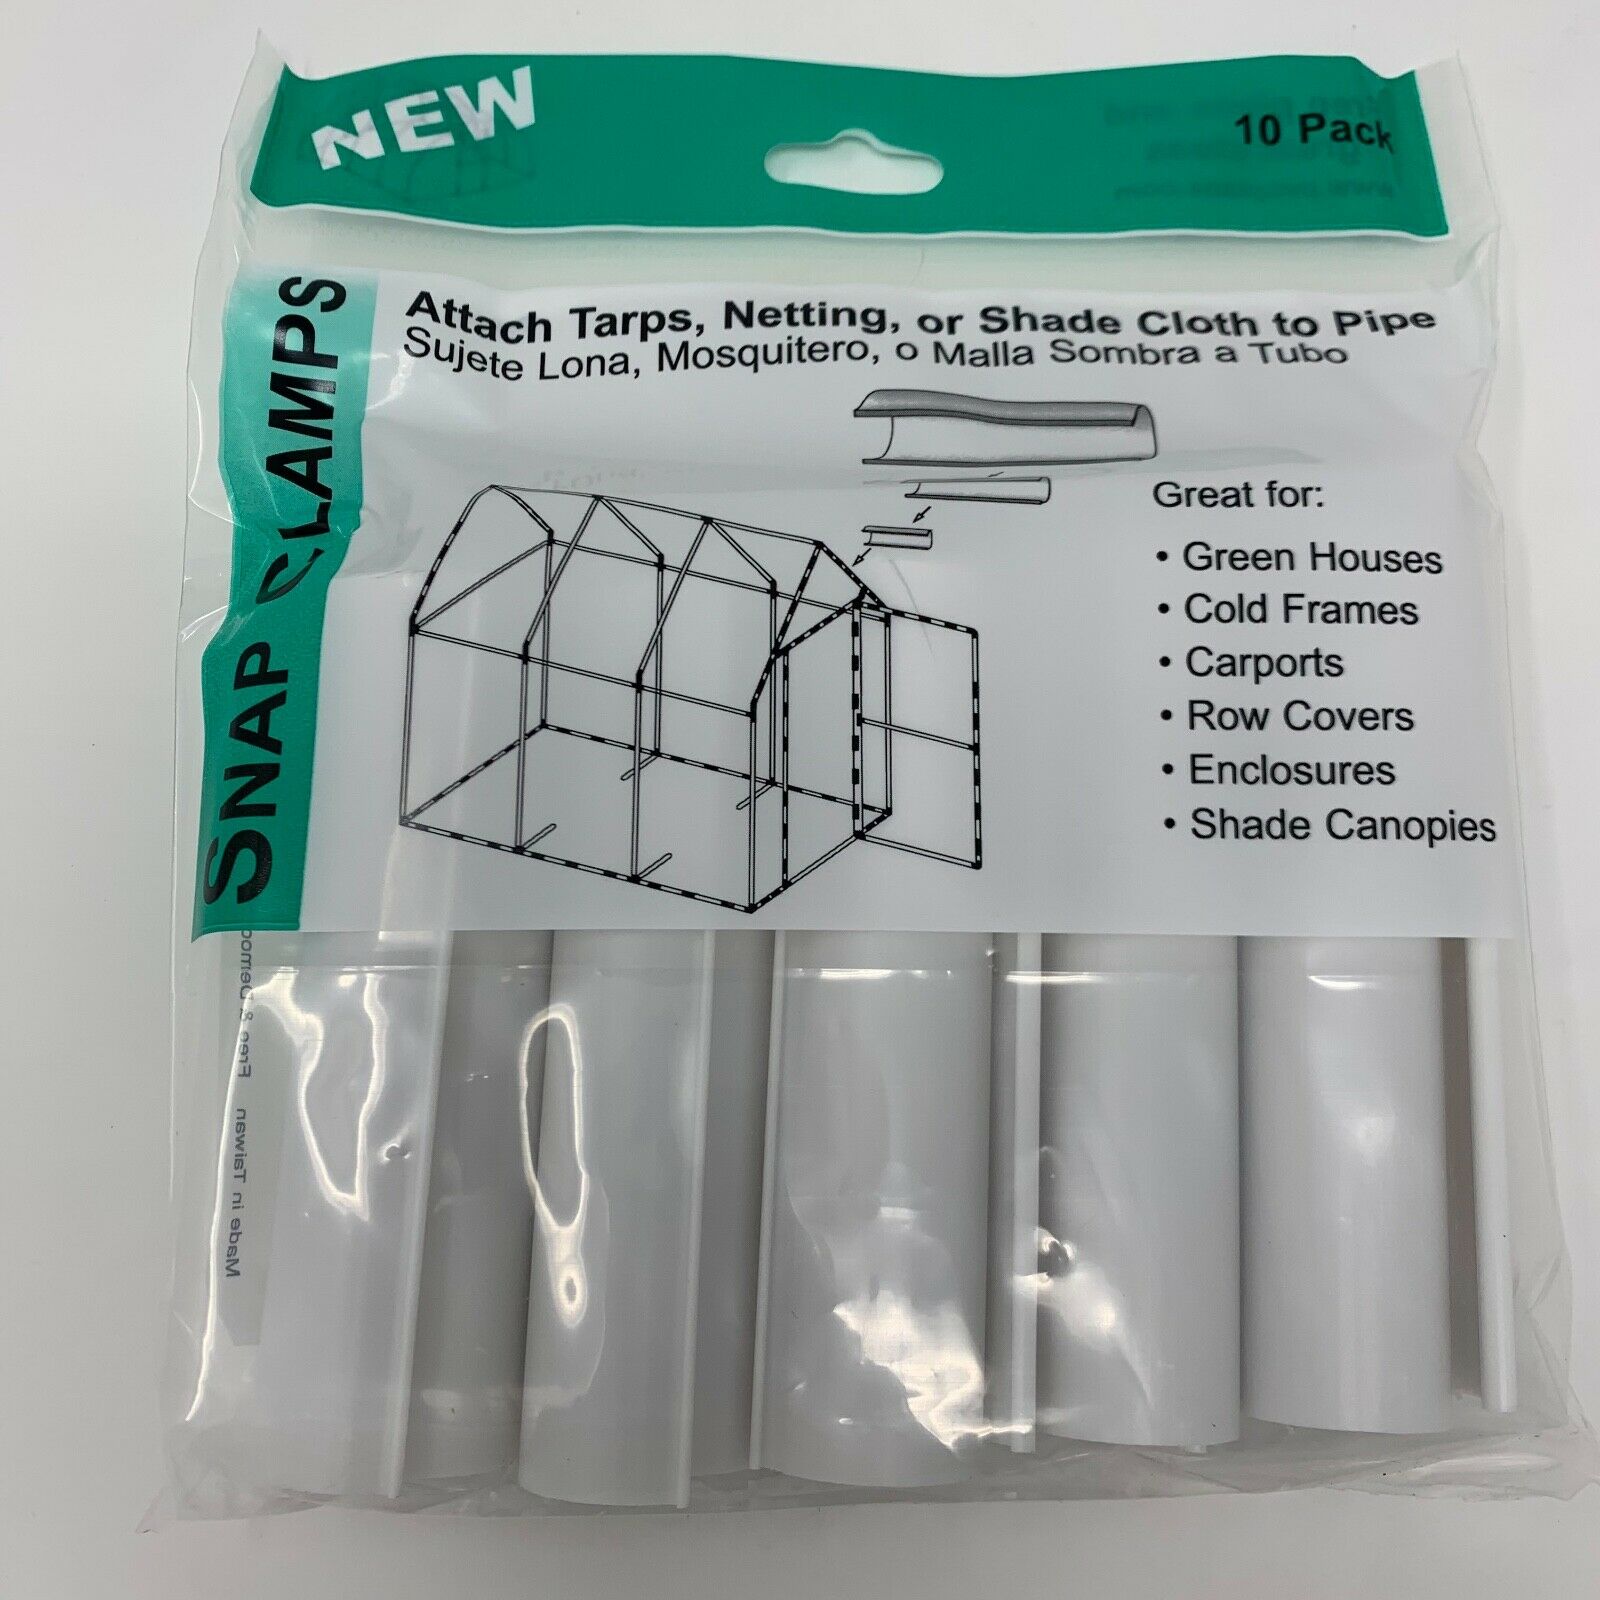 Snap Clamps - Fits 1/2" Pvc Pipe - Clamp Tarps Shade Plastic To Pvc Greenhouse